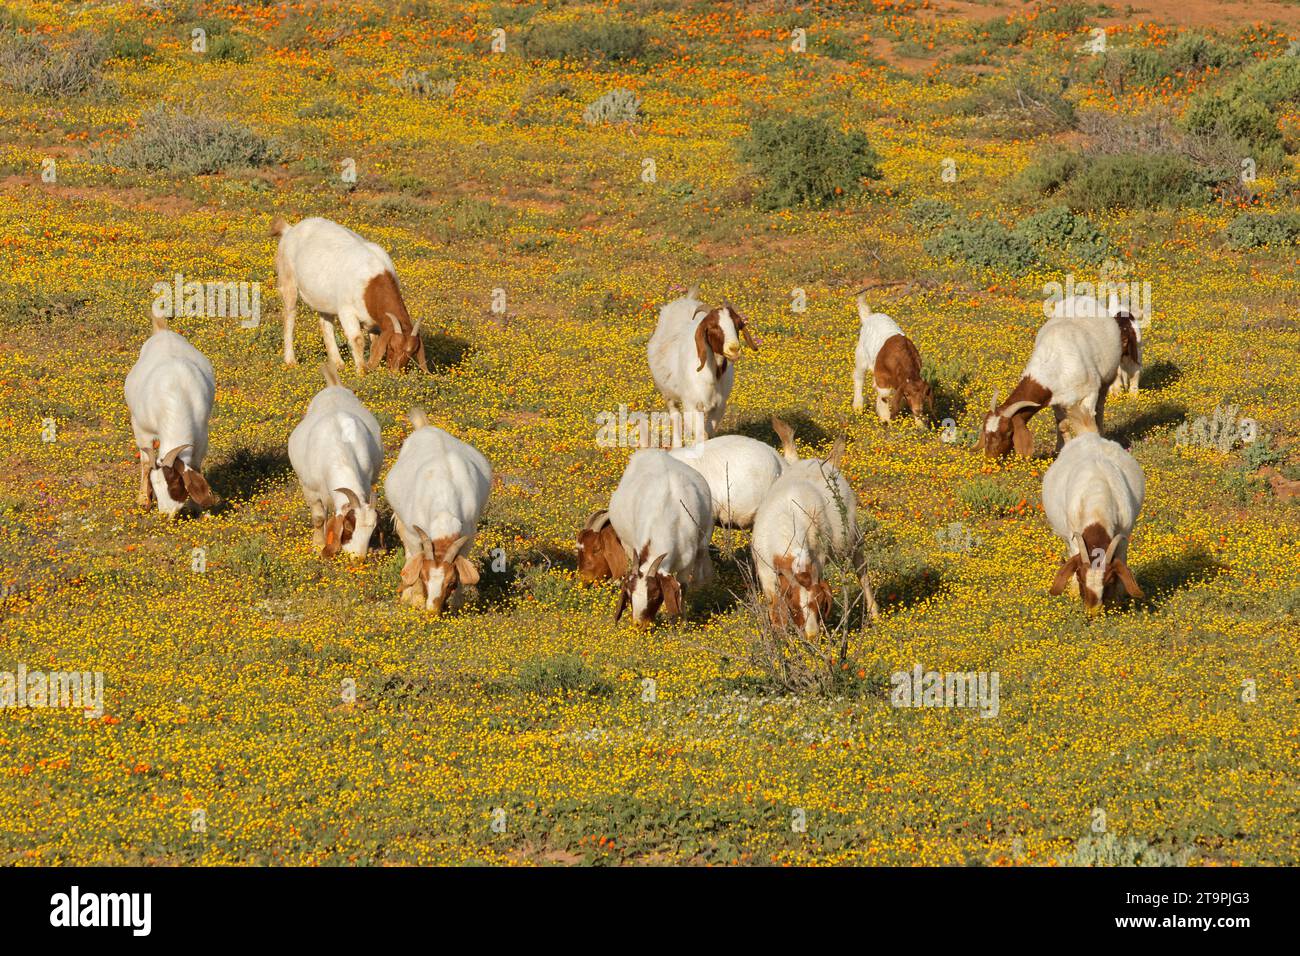 Free-range goats feeding in a field with yellow wild flowers, Namaqualand, South Africa Stock Photo